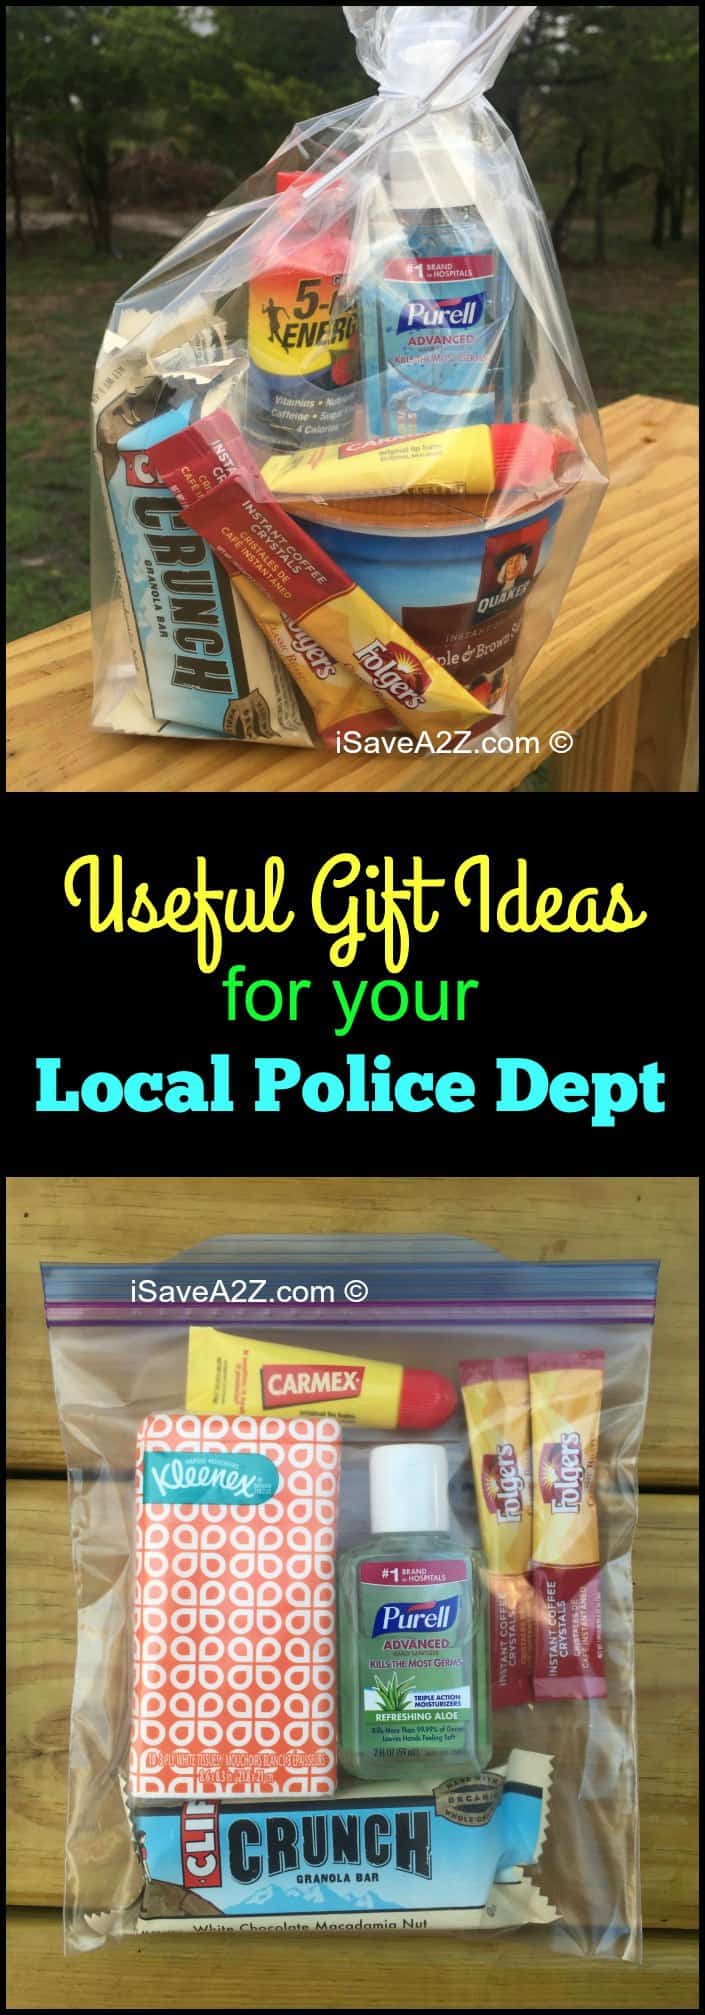 The Best Gift For Police Officer - Ace Link Armor